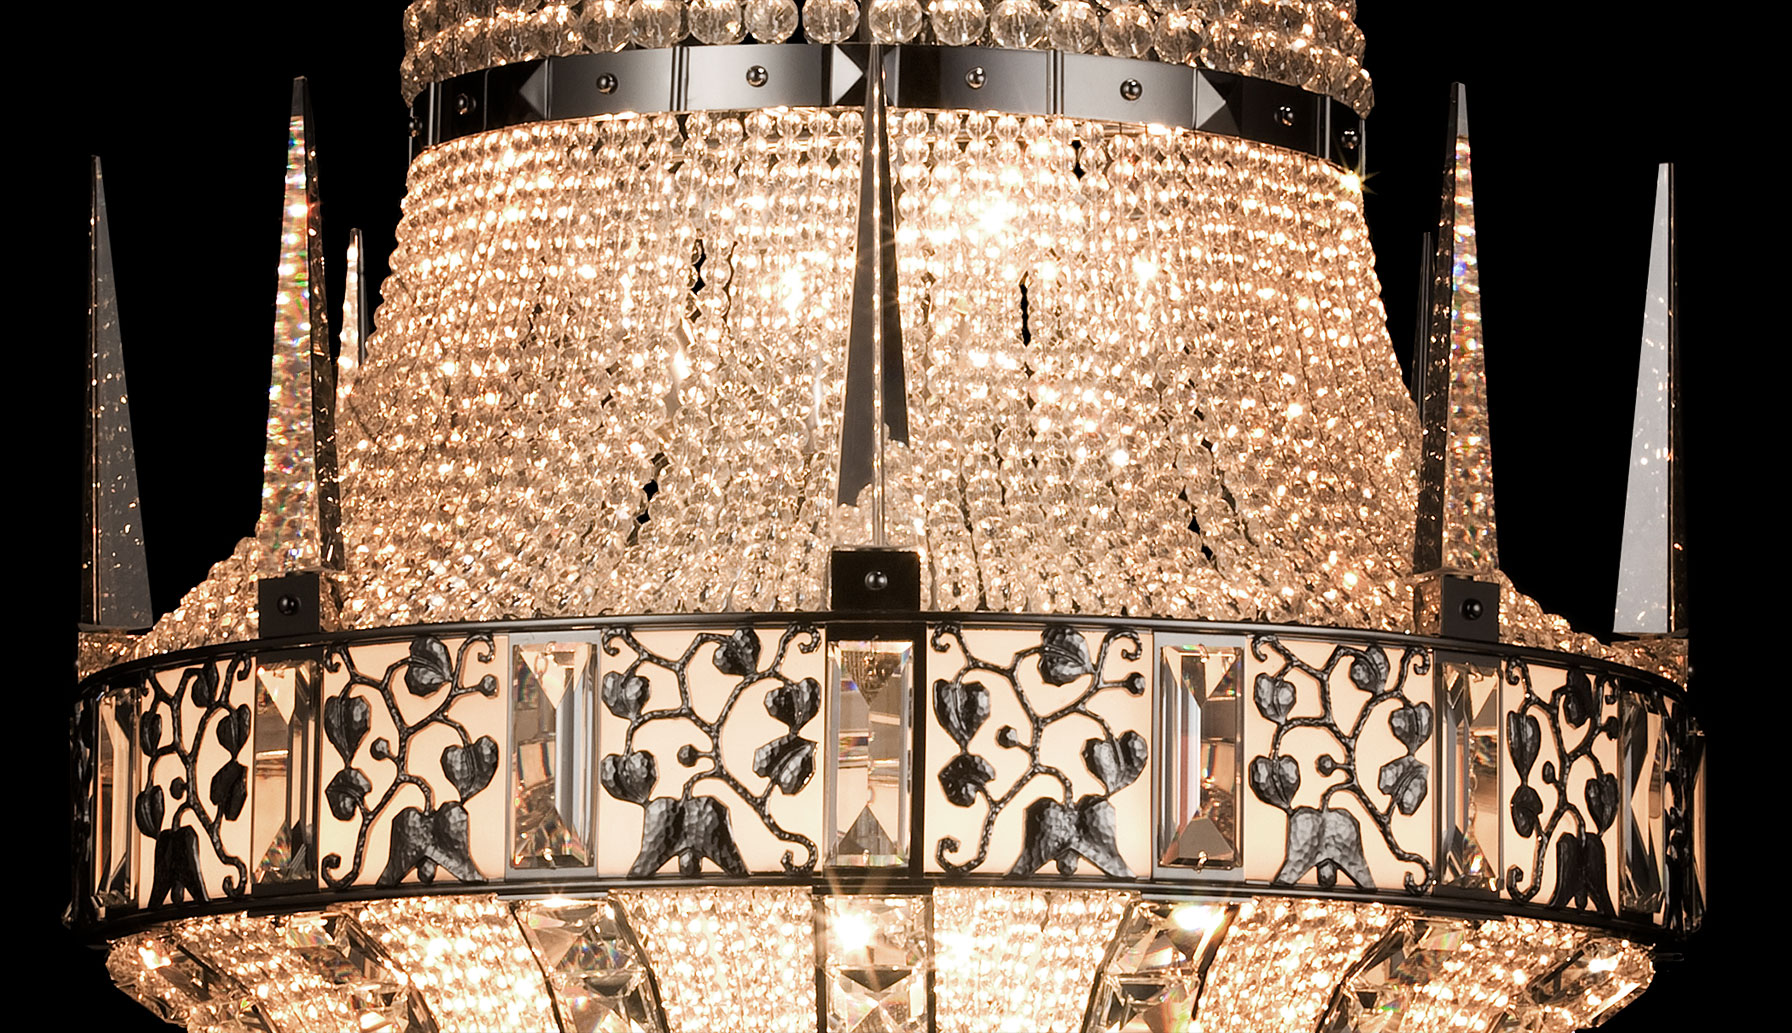 Detail of the Cologne chandelier main belt and crystal pyramids